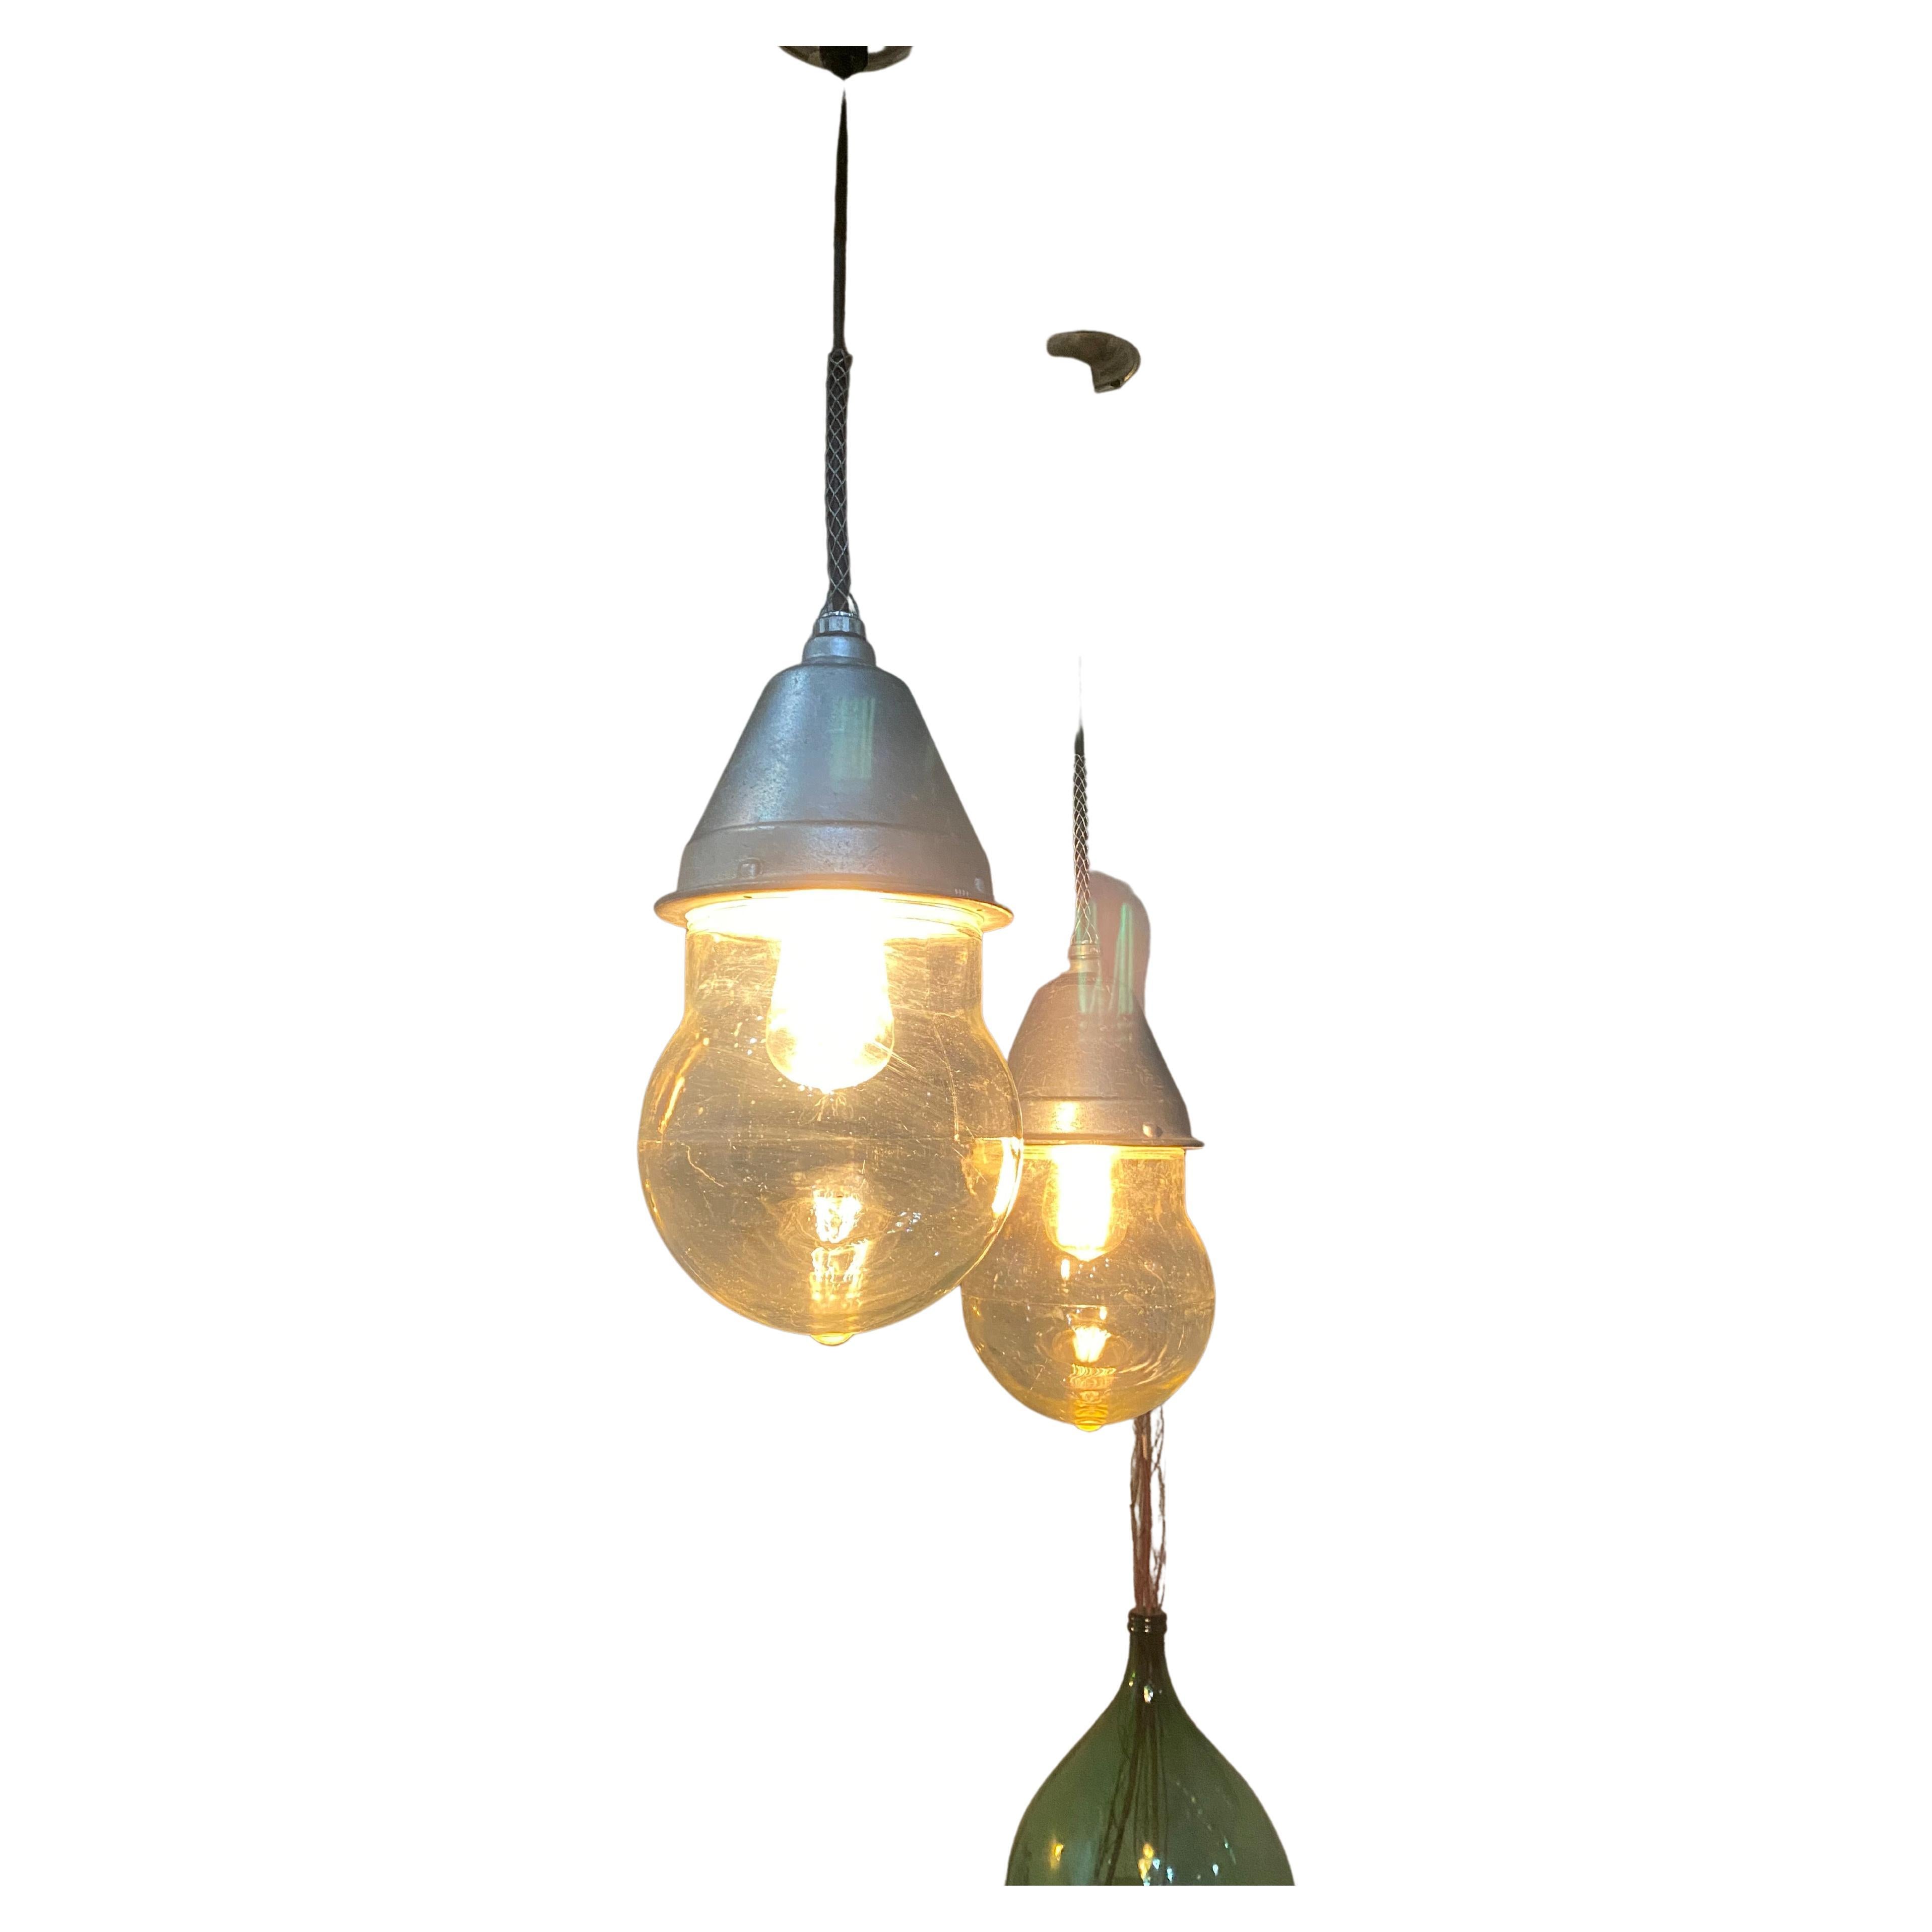 1940 Industrial Crouse Hinds VDB Pendant Light